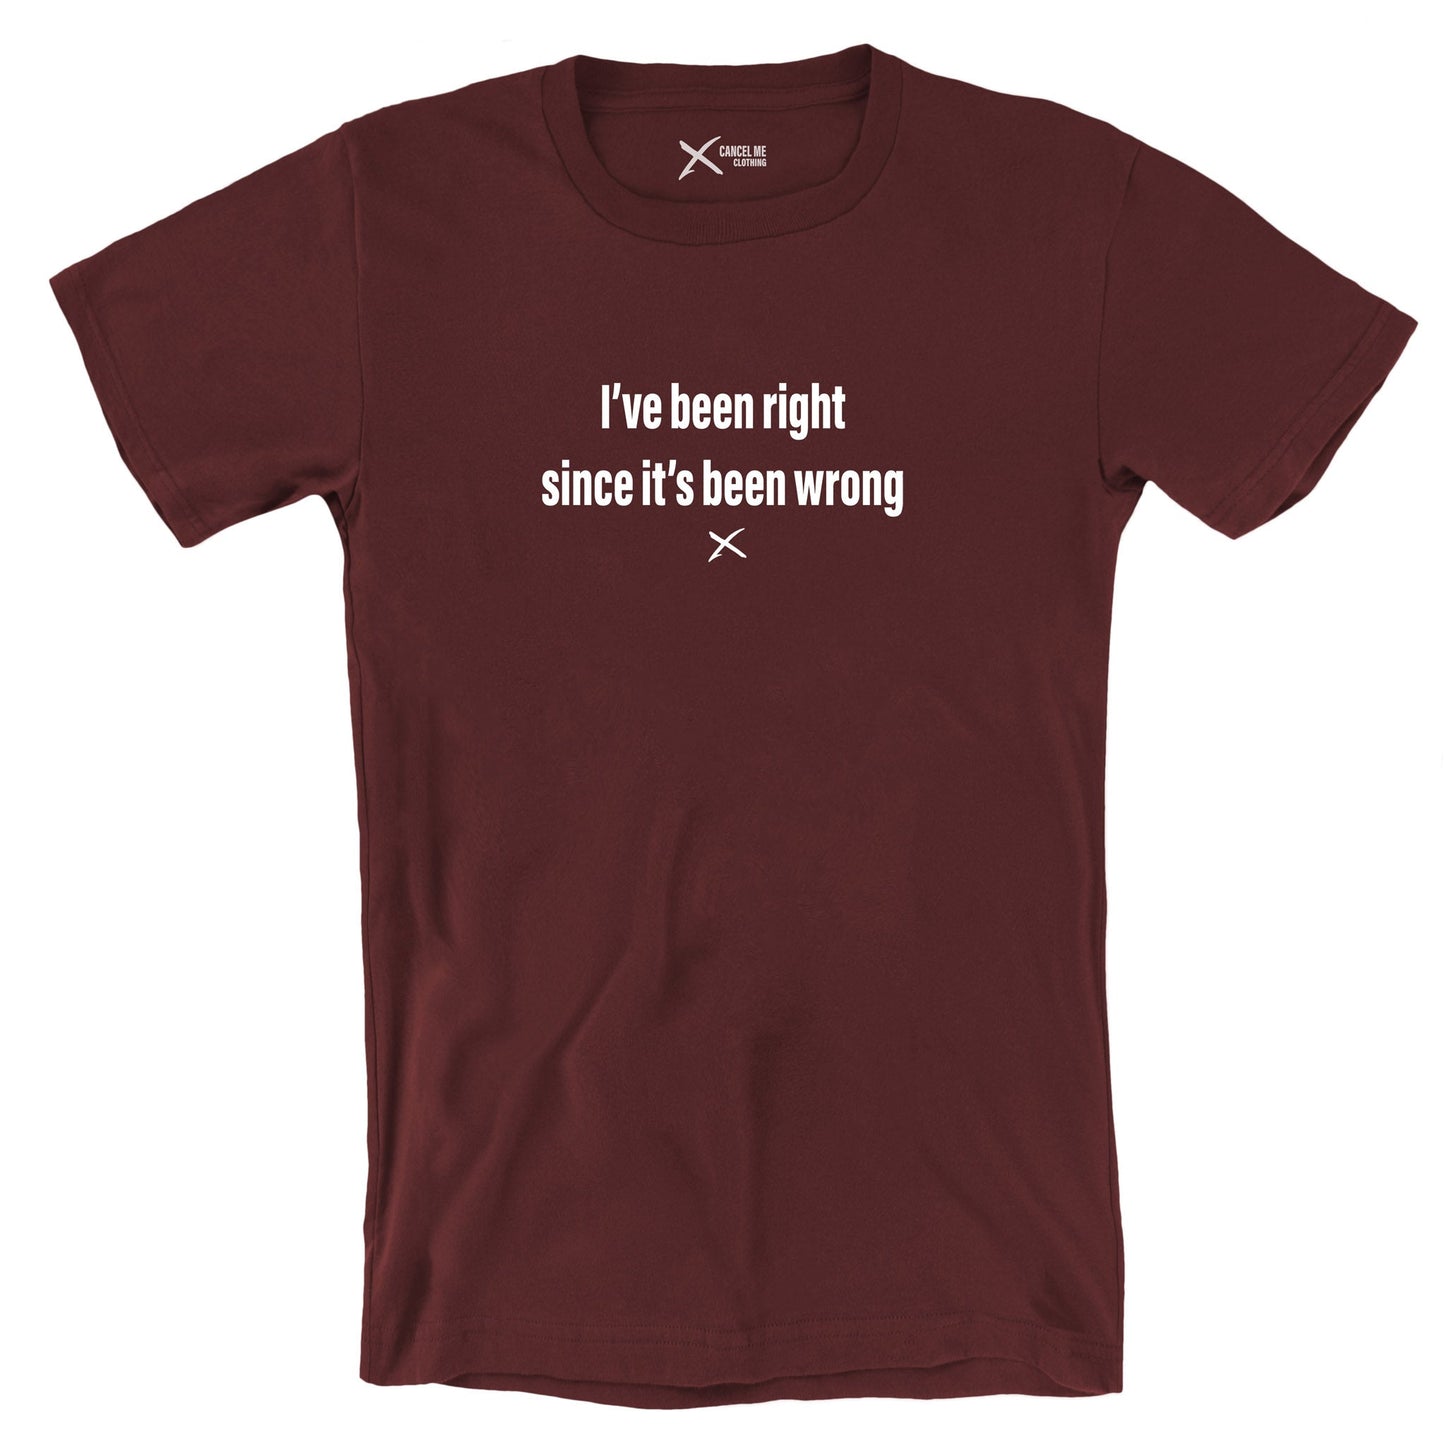 I've been right since it's been wrong - Shirt